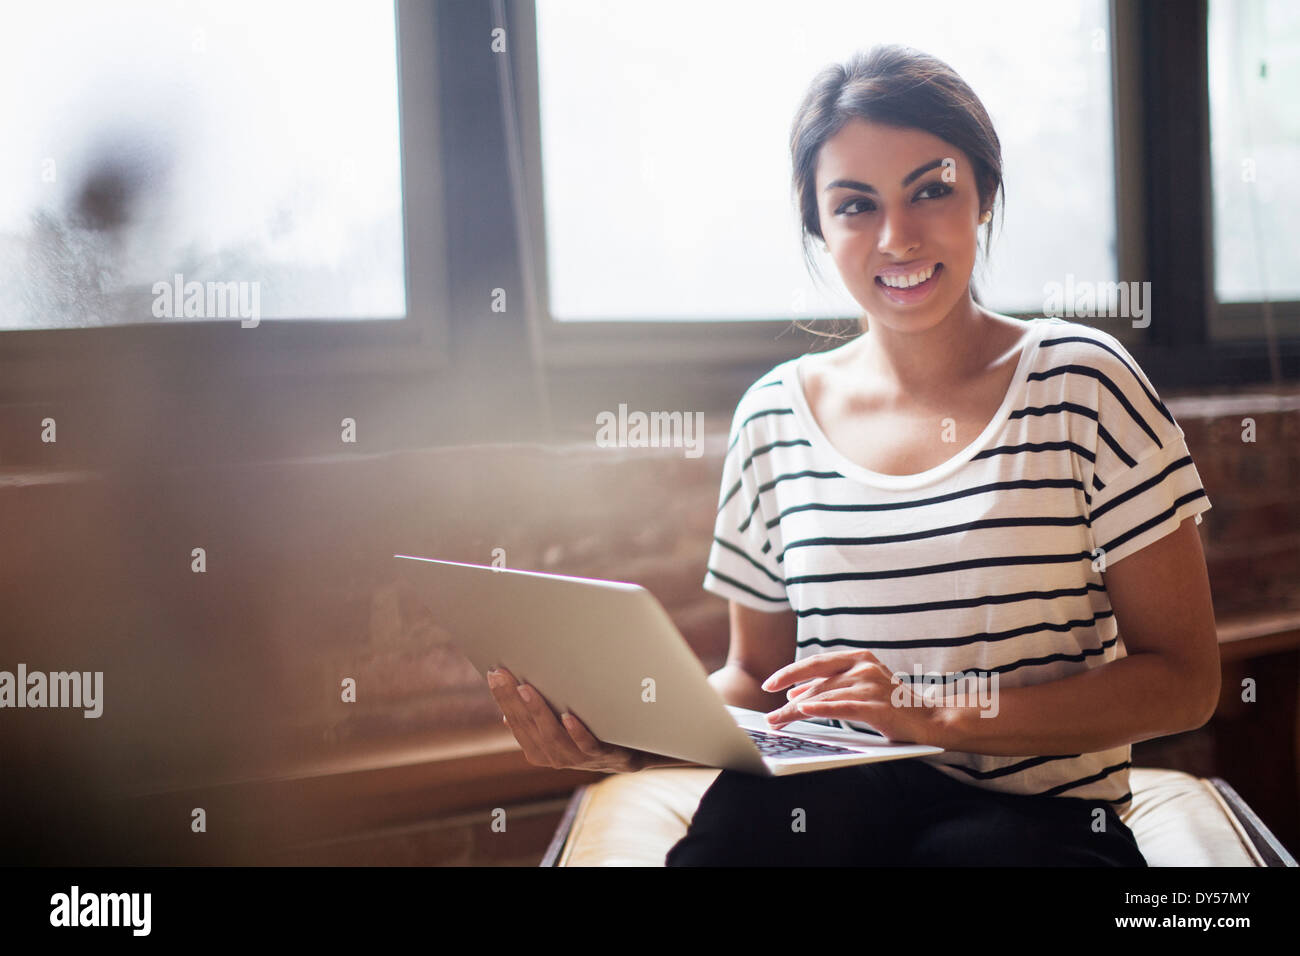 Young woman using laptop computer Stock Photo